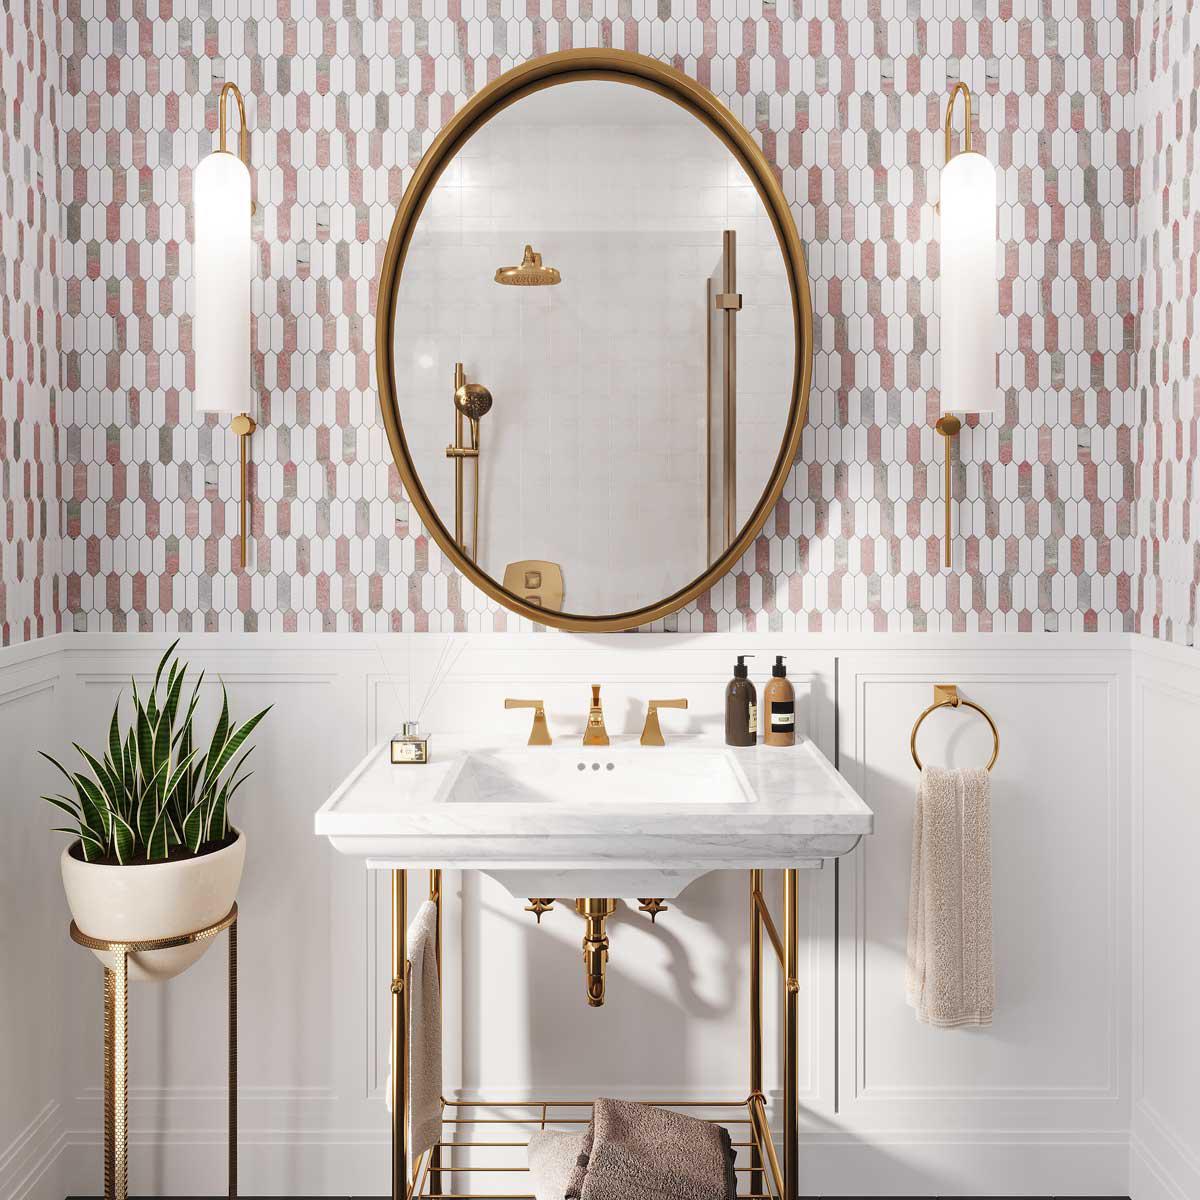 Pink marble tile bathroom wall design with Norwegian Rose and Thassos pickets